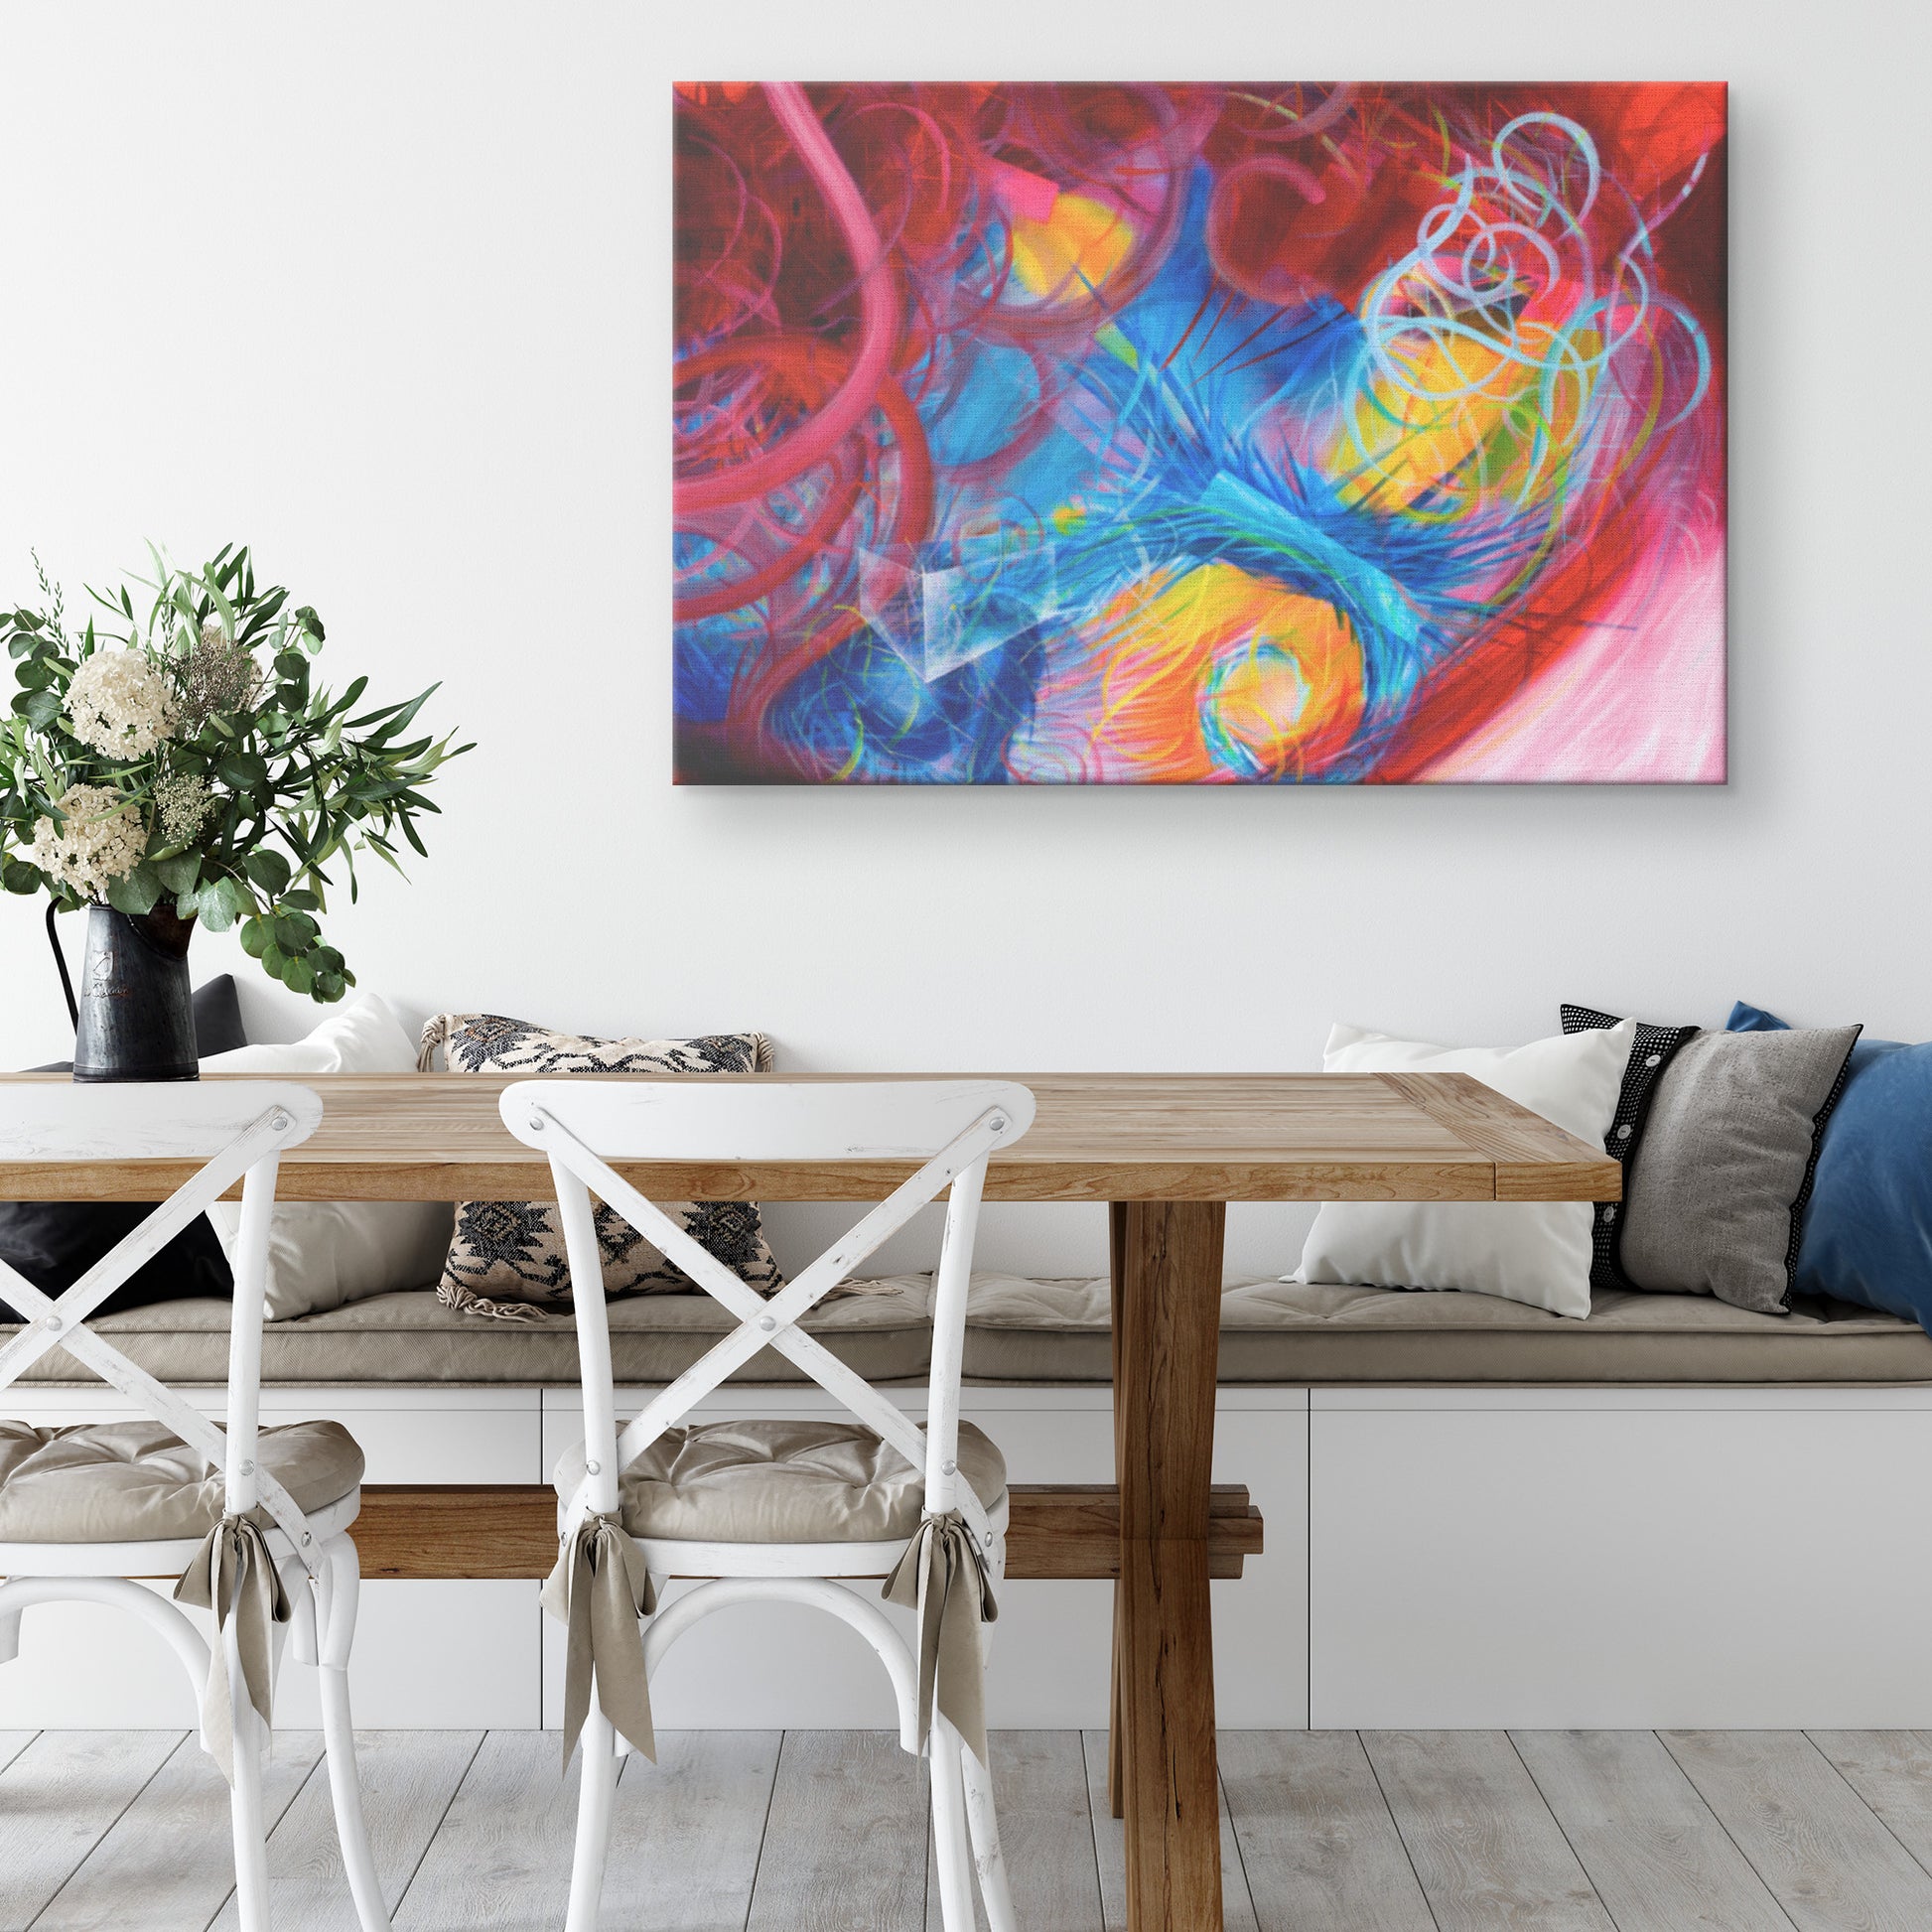 Michael Carini's abstract paintings are perfect for your office walls